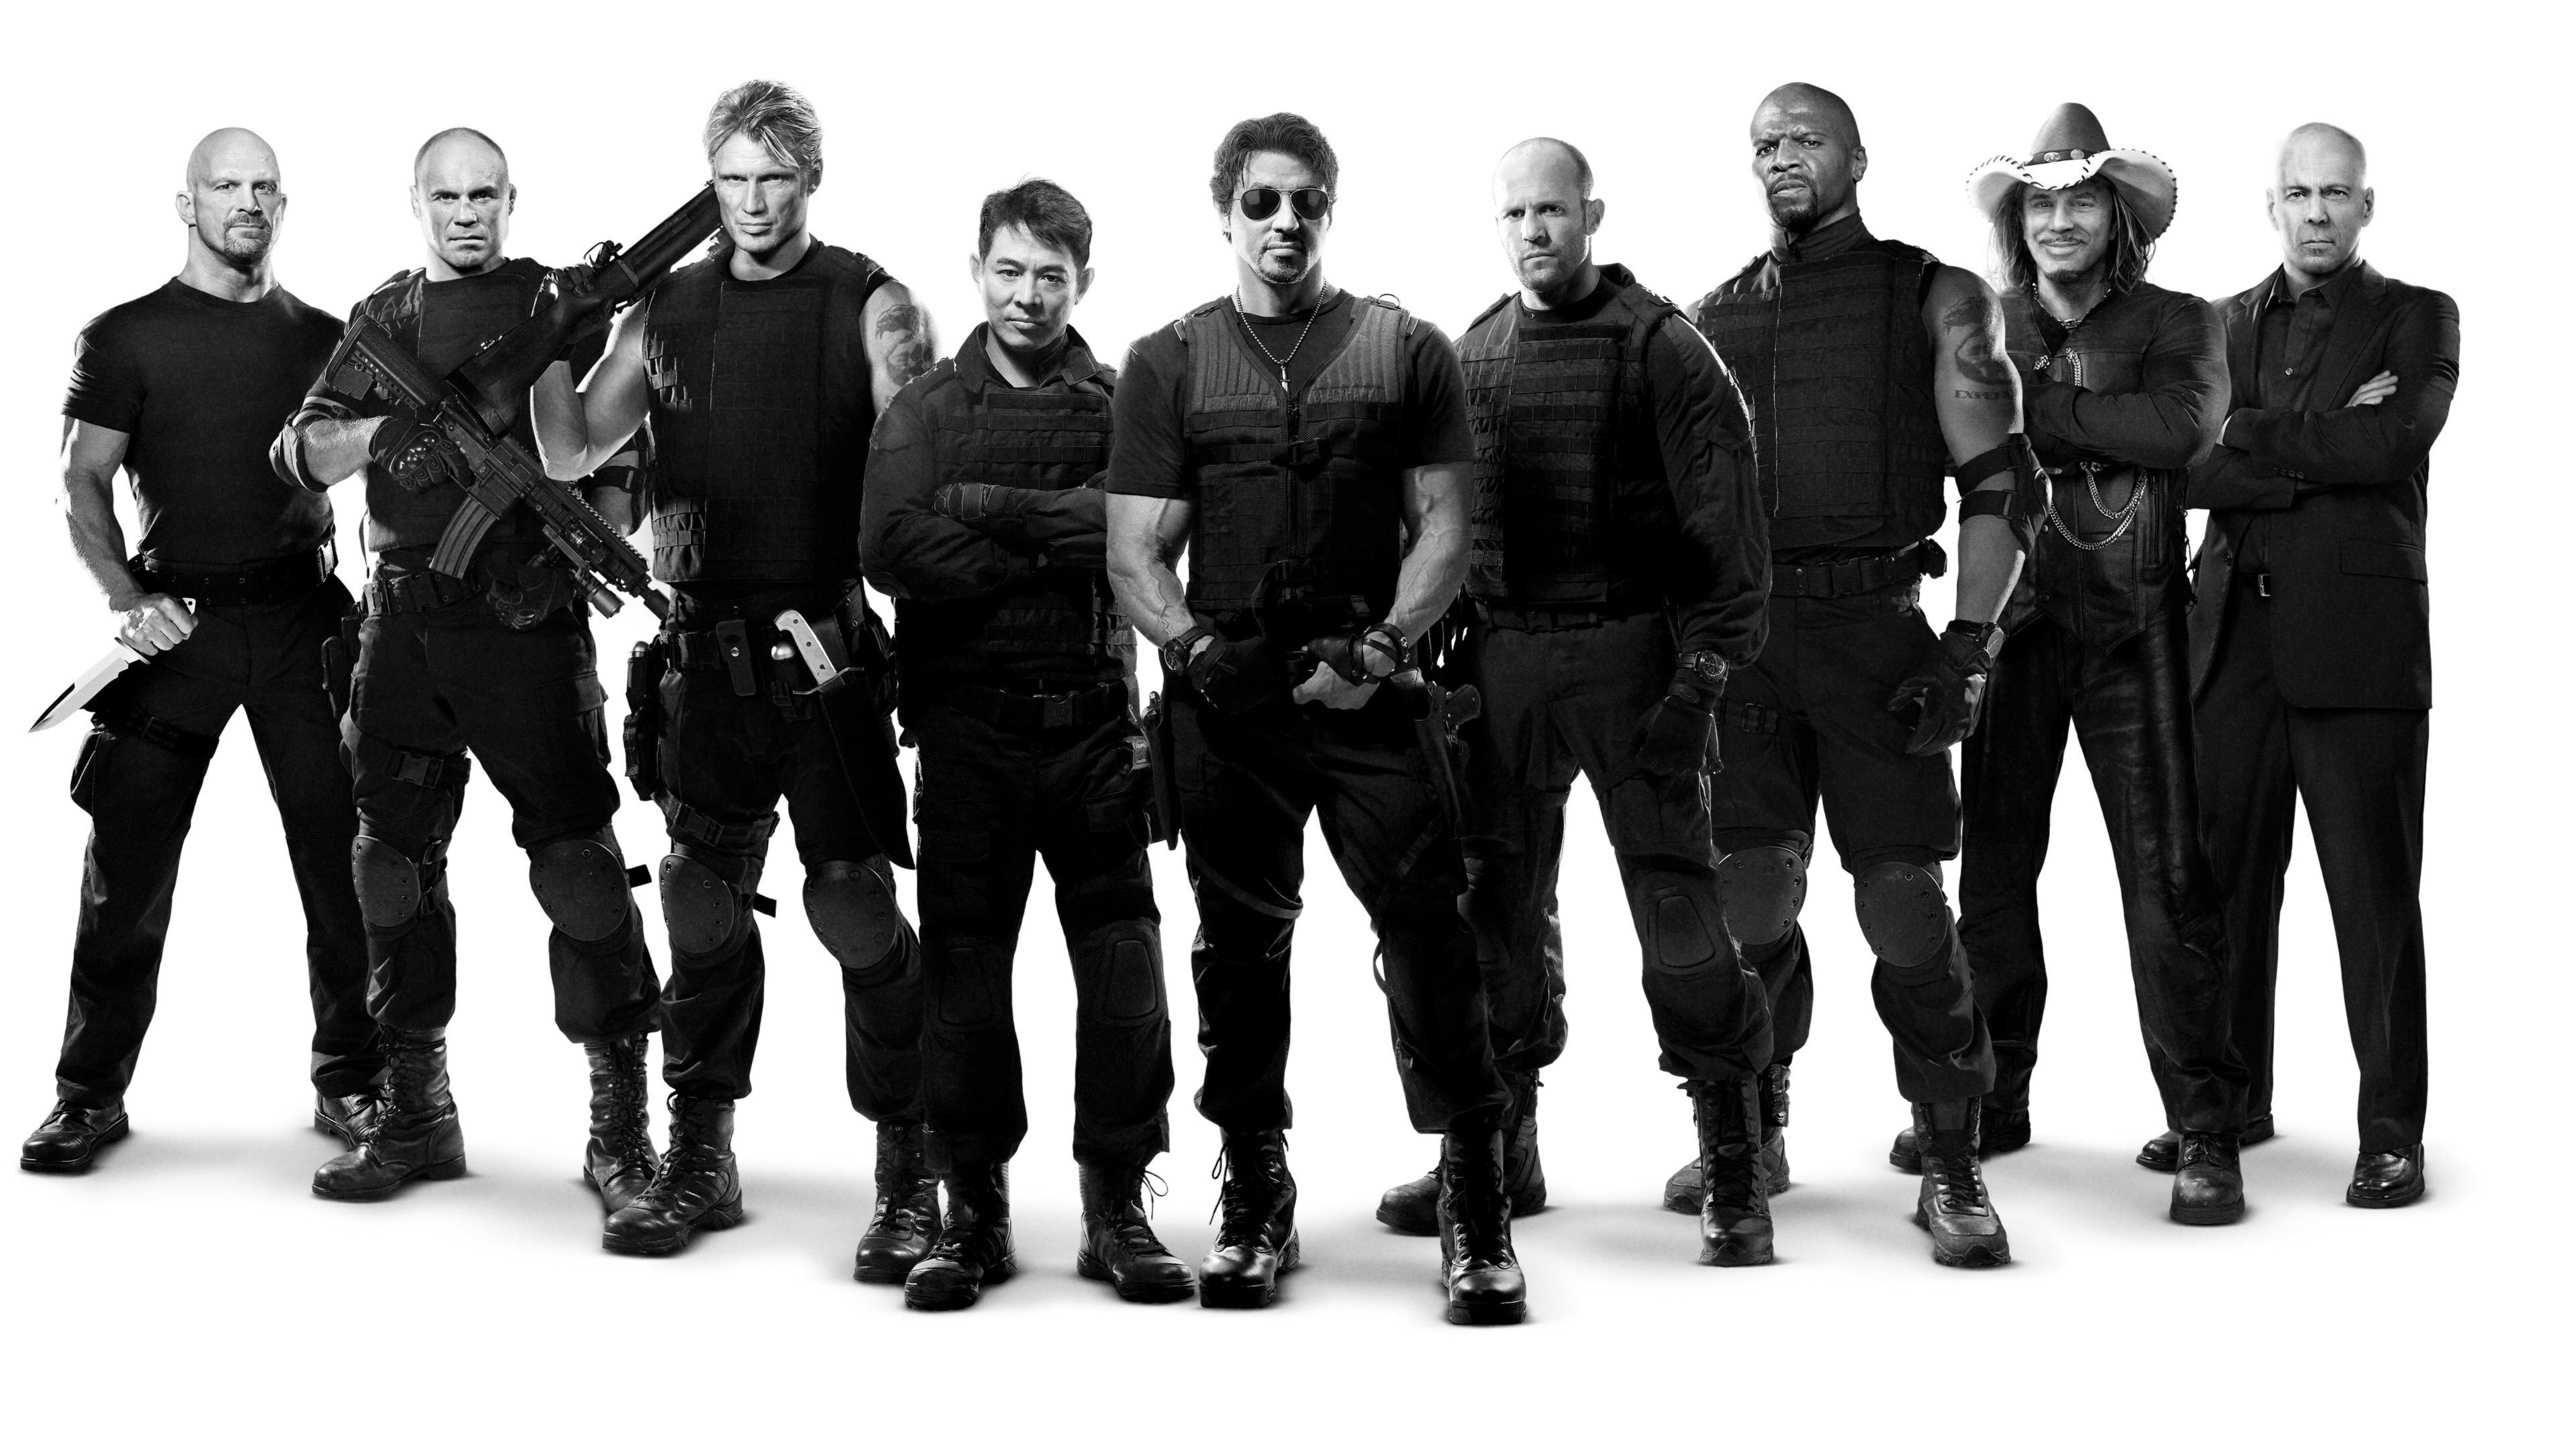 The Expendables for 2560x1440 HDTV resolution